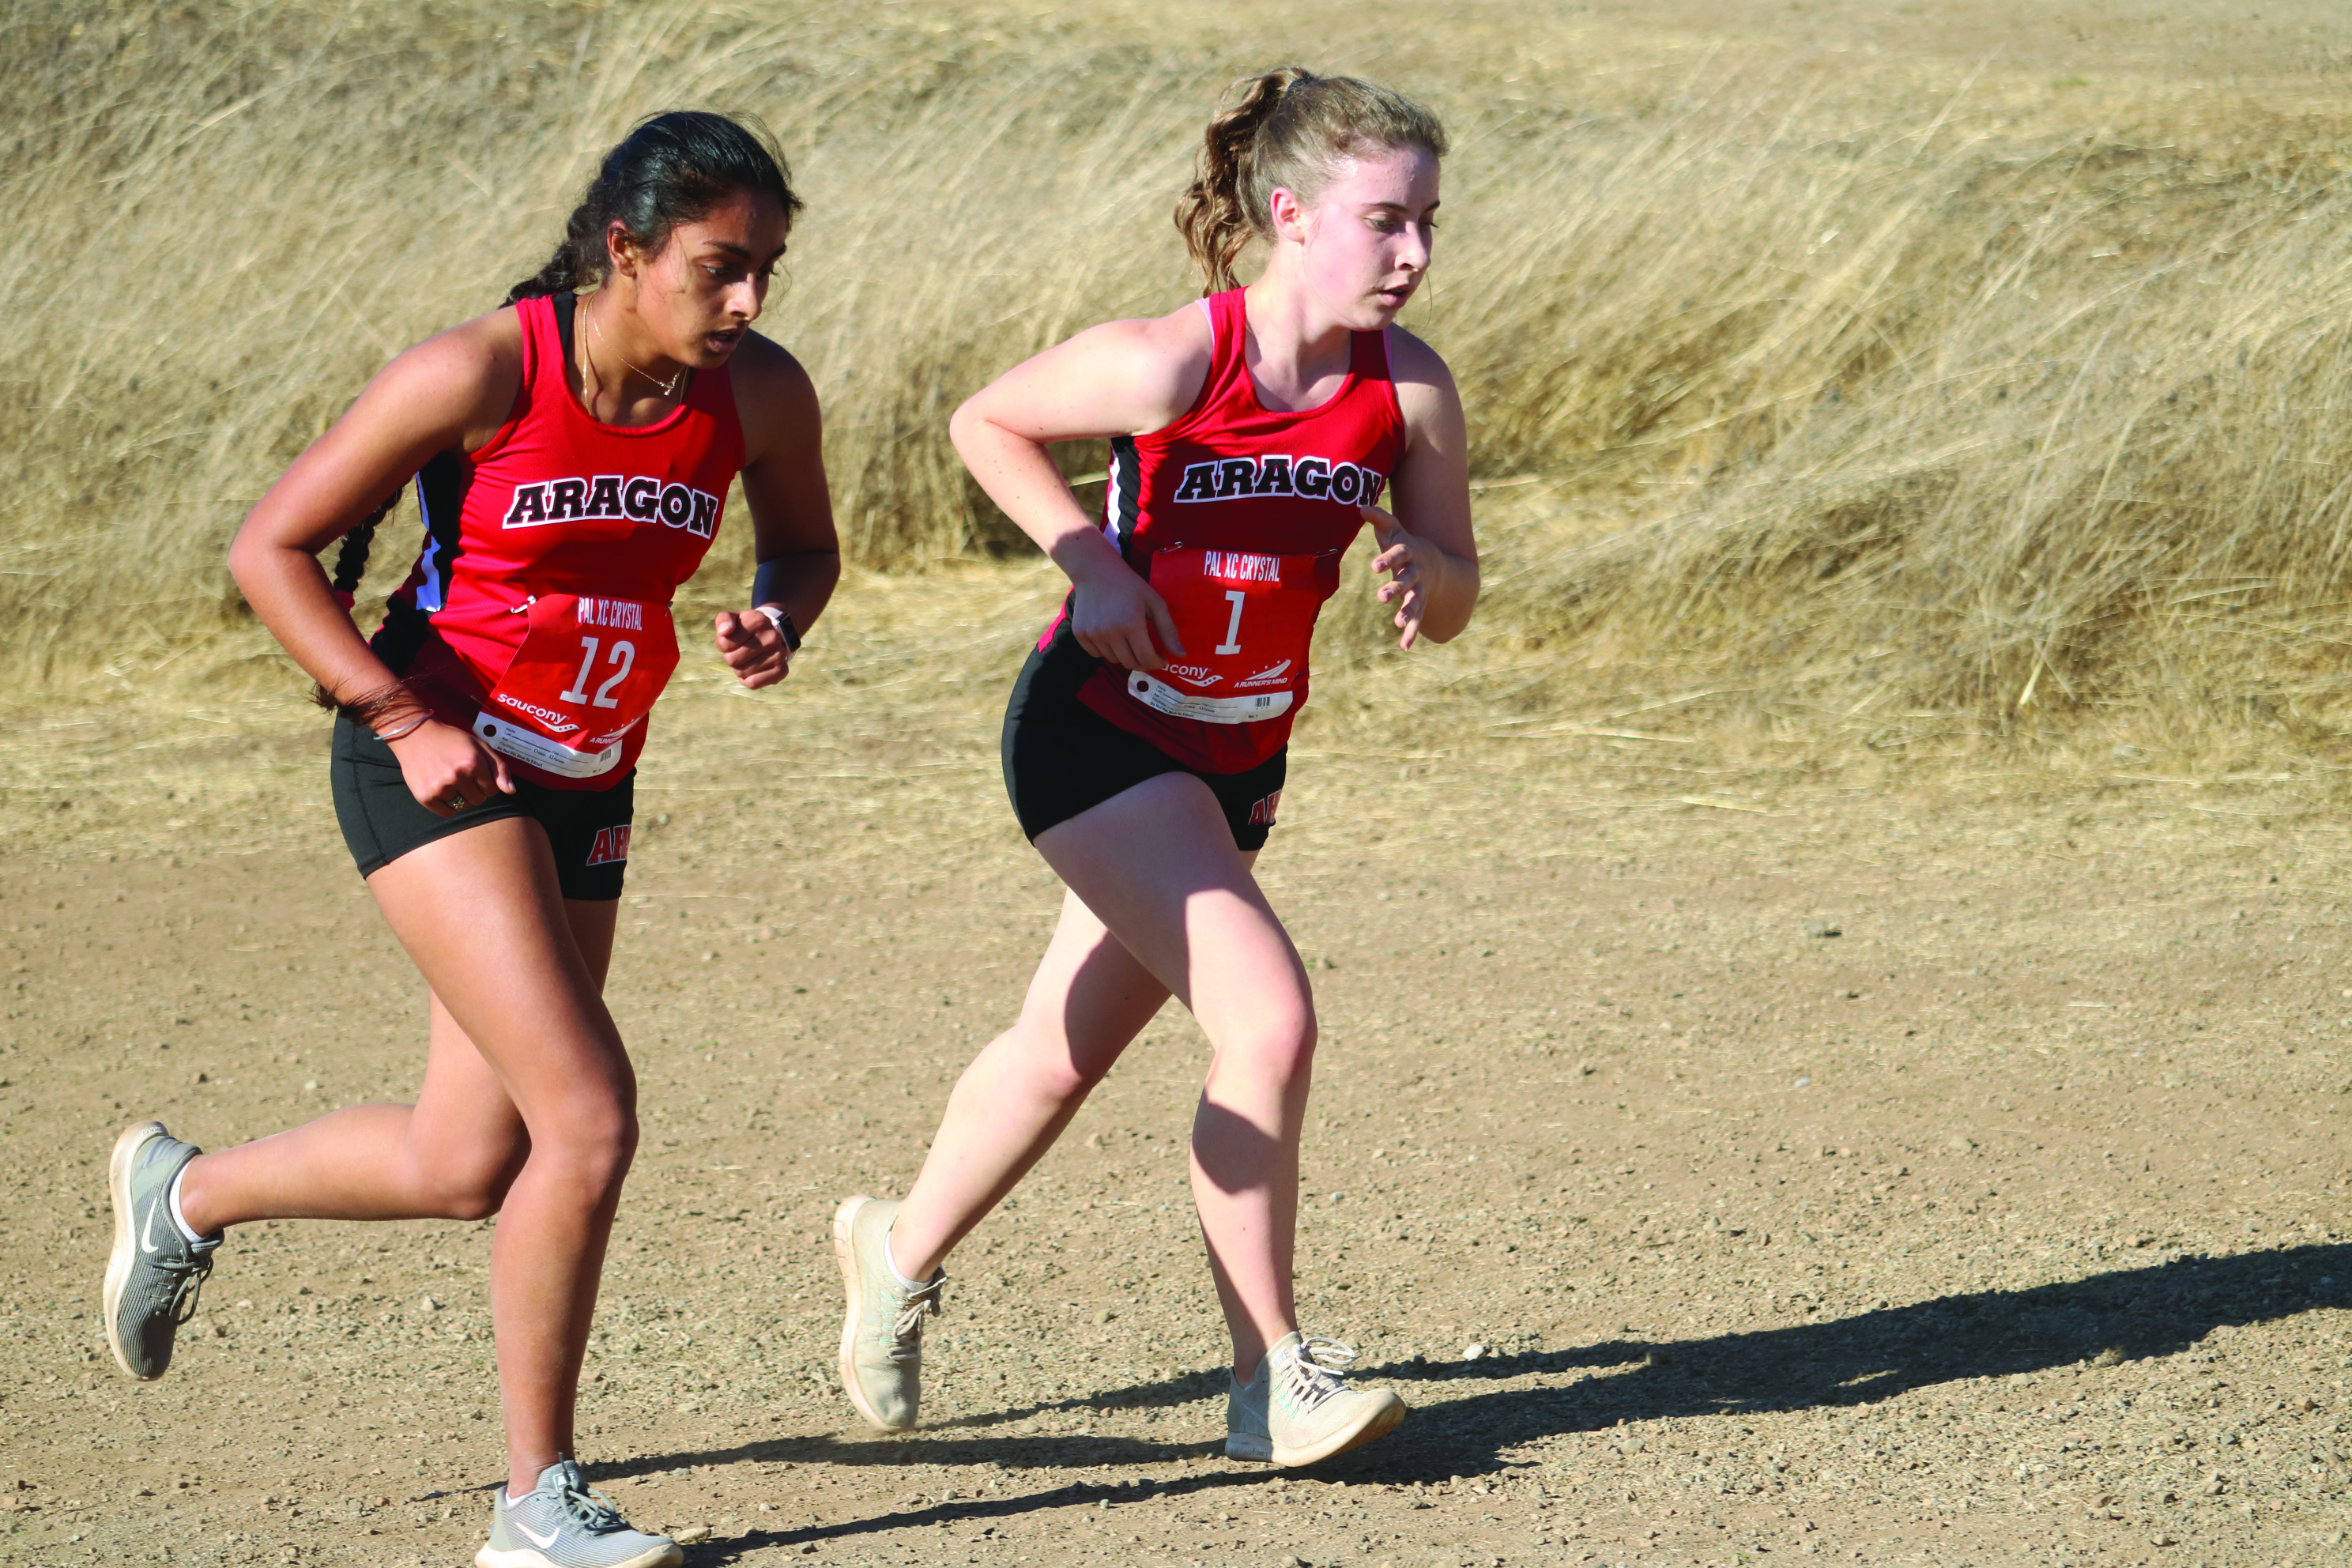 The Dons set 23 new records at the third Peninsula Athletic League Meet at the Crystal Spring course.